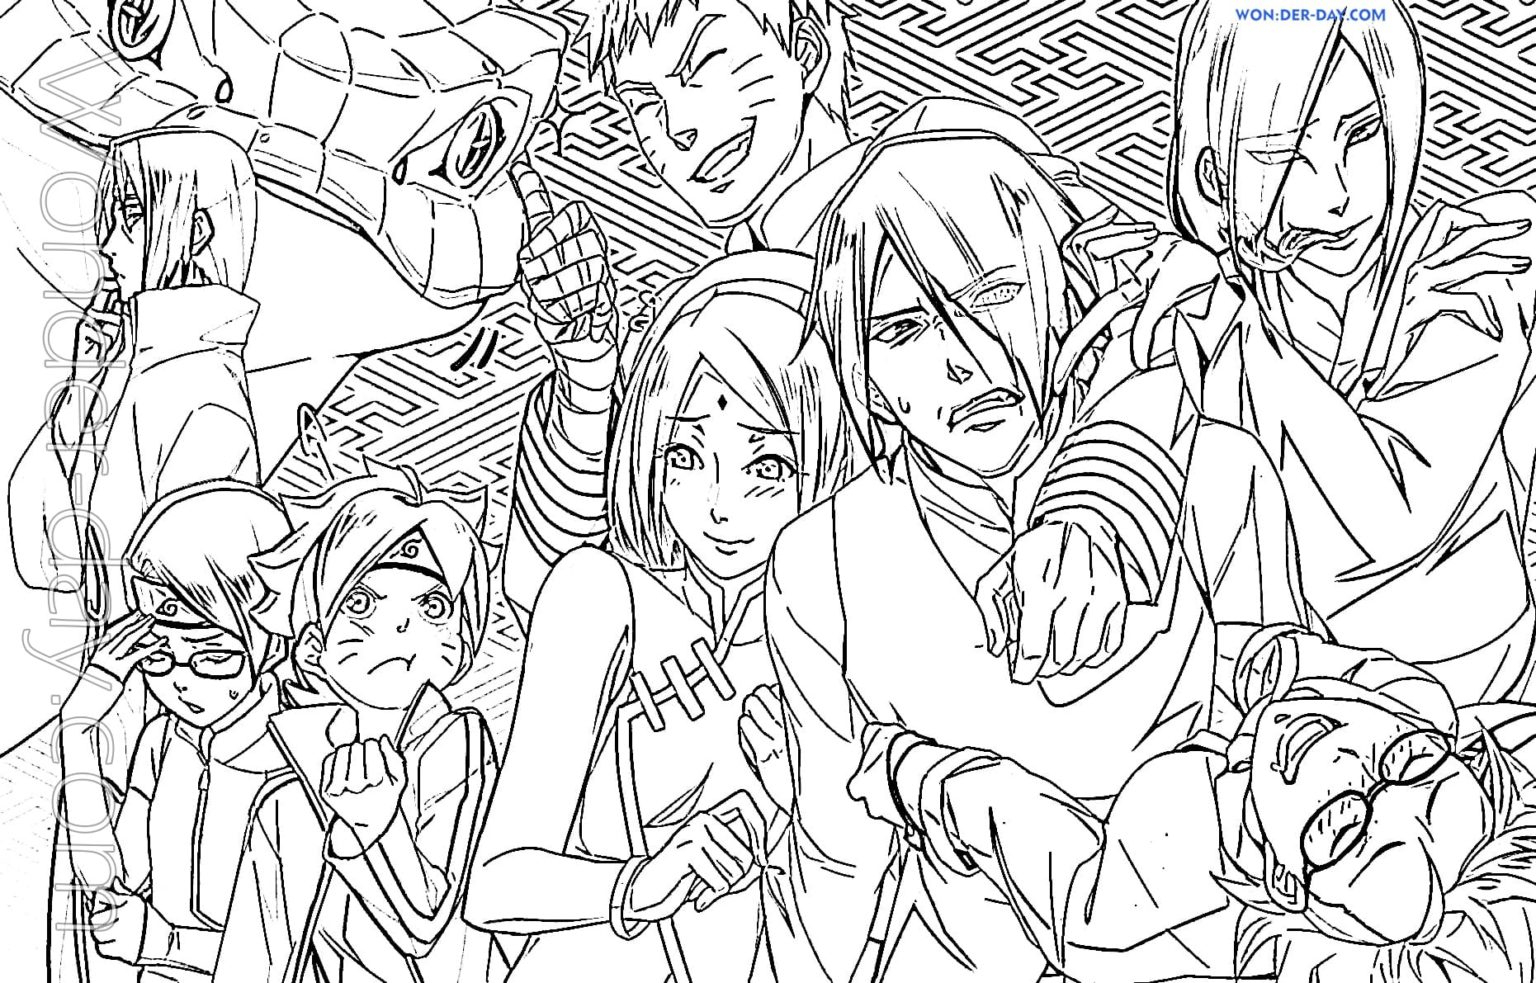 Boruto Coloring Pages - Print And Color | Wonder Day — Coloring Pages avec Coloriage Boruto